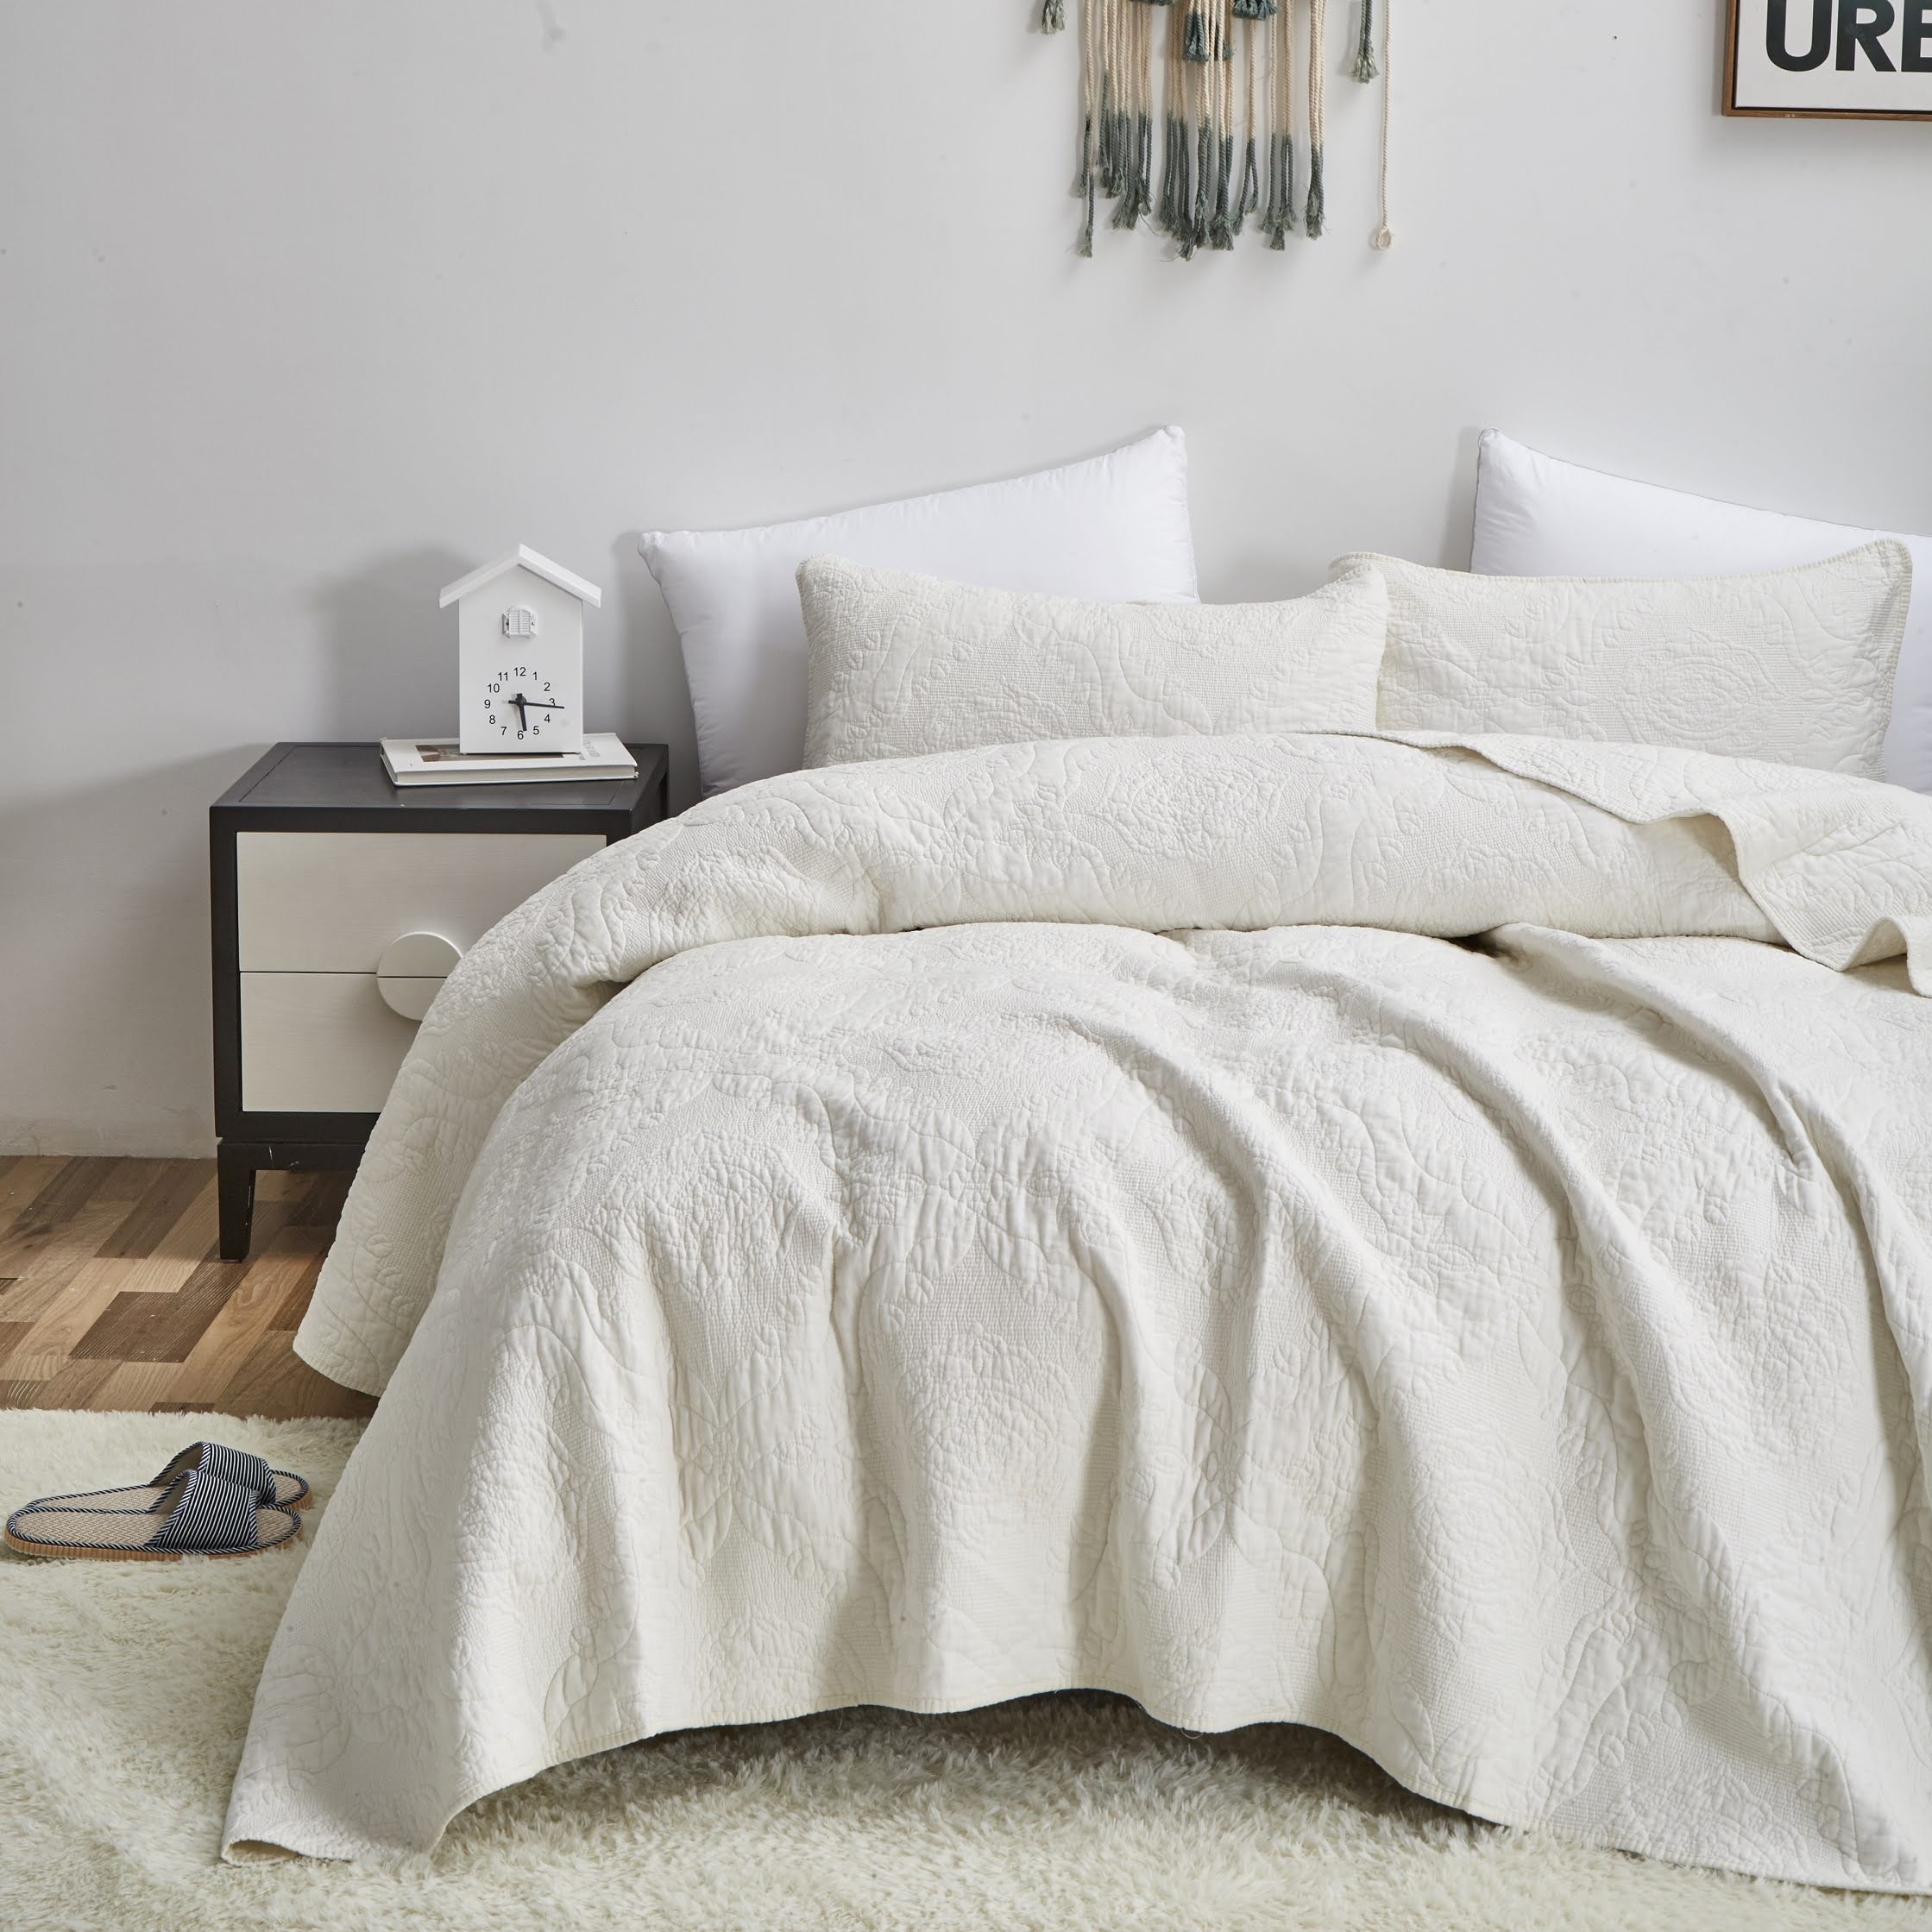 ivory white quilt and pillow shams on relaxed cozy bed. click to view all quilts and bedspreads.